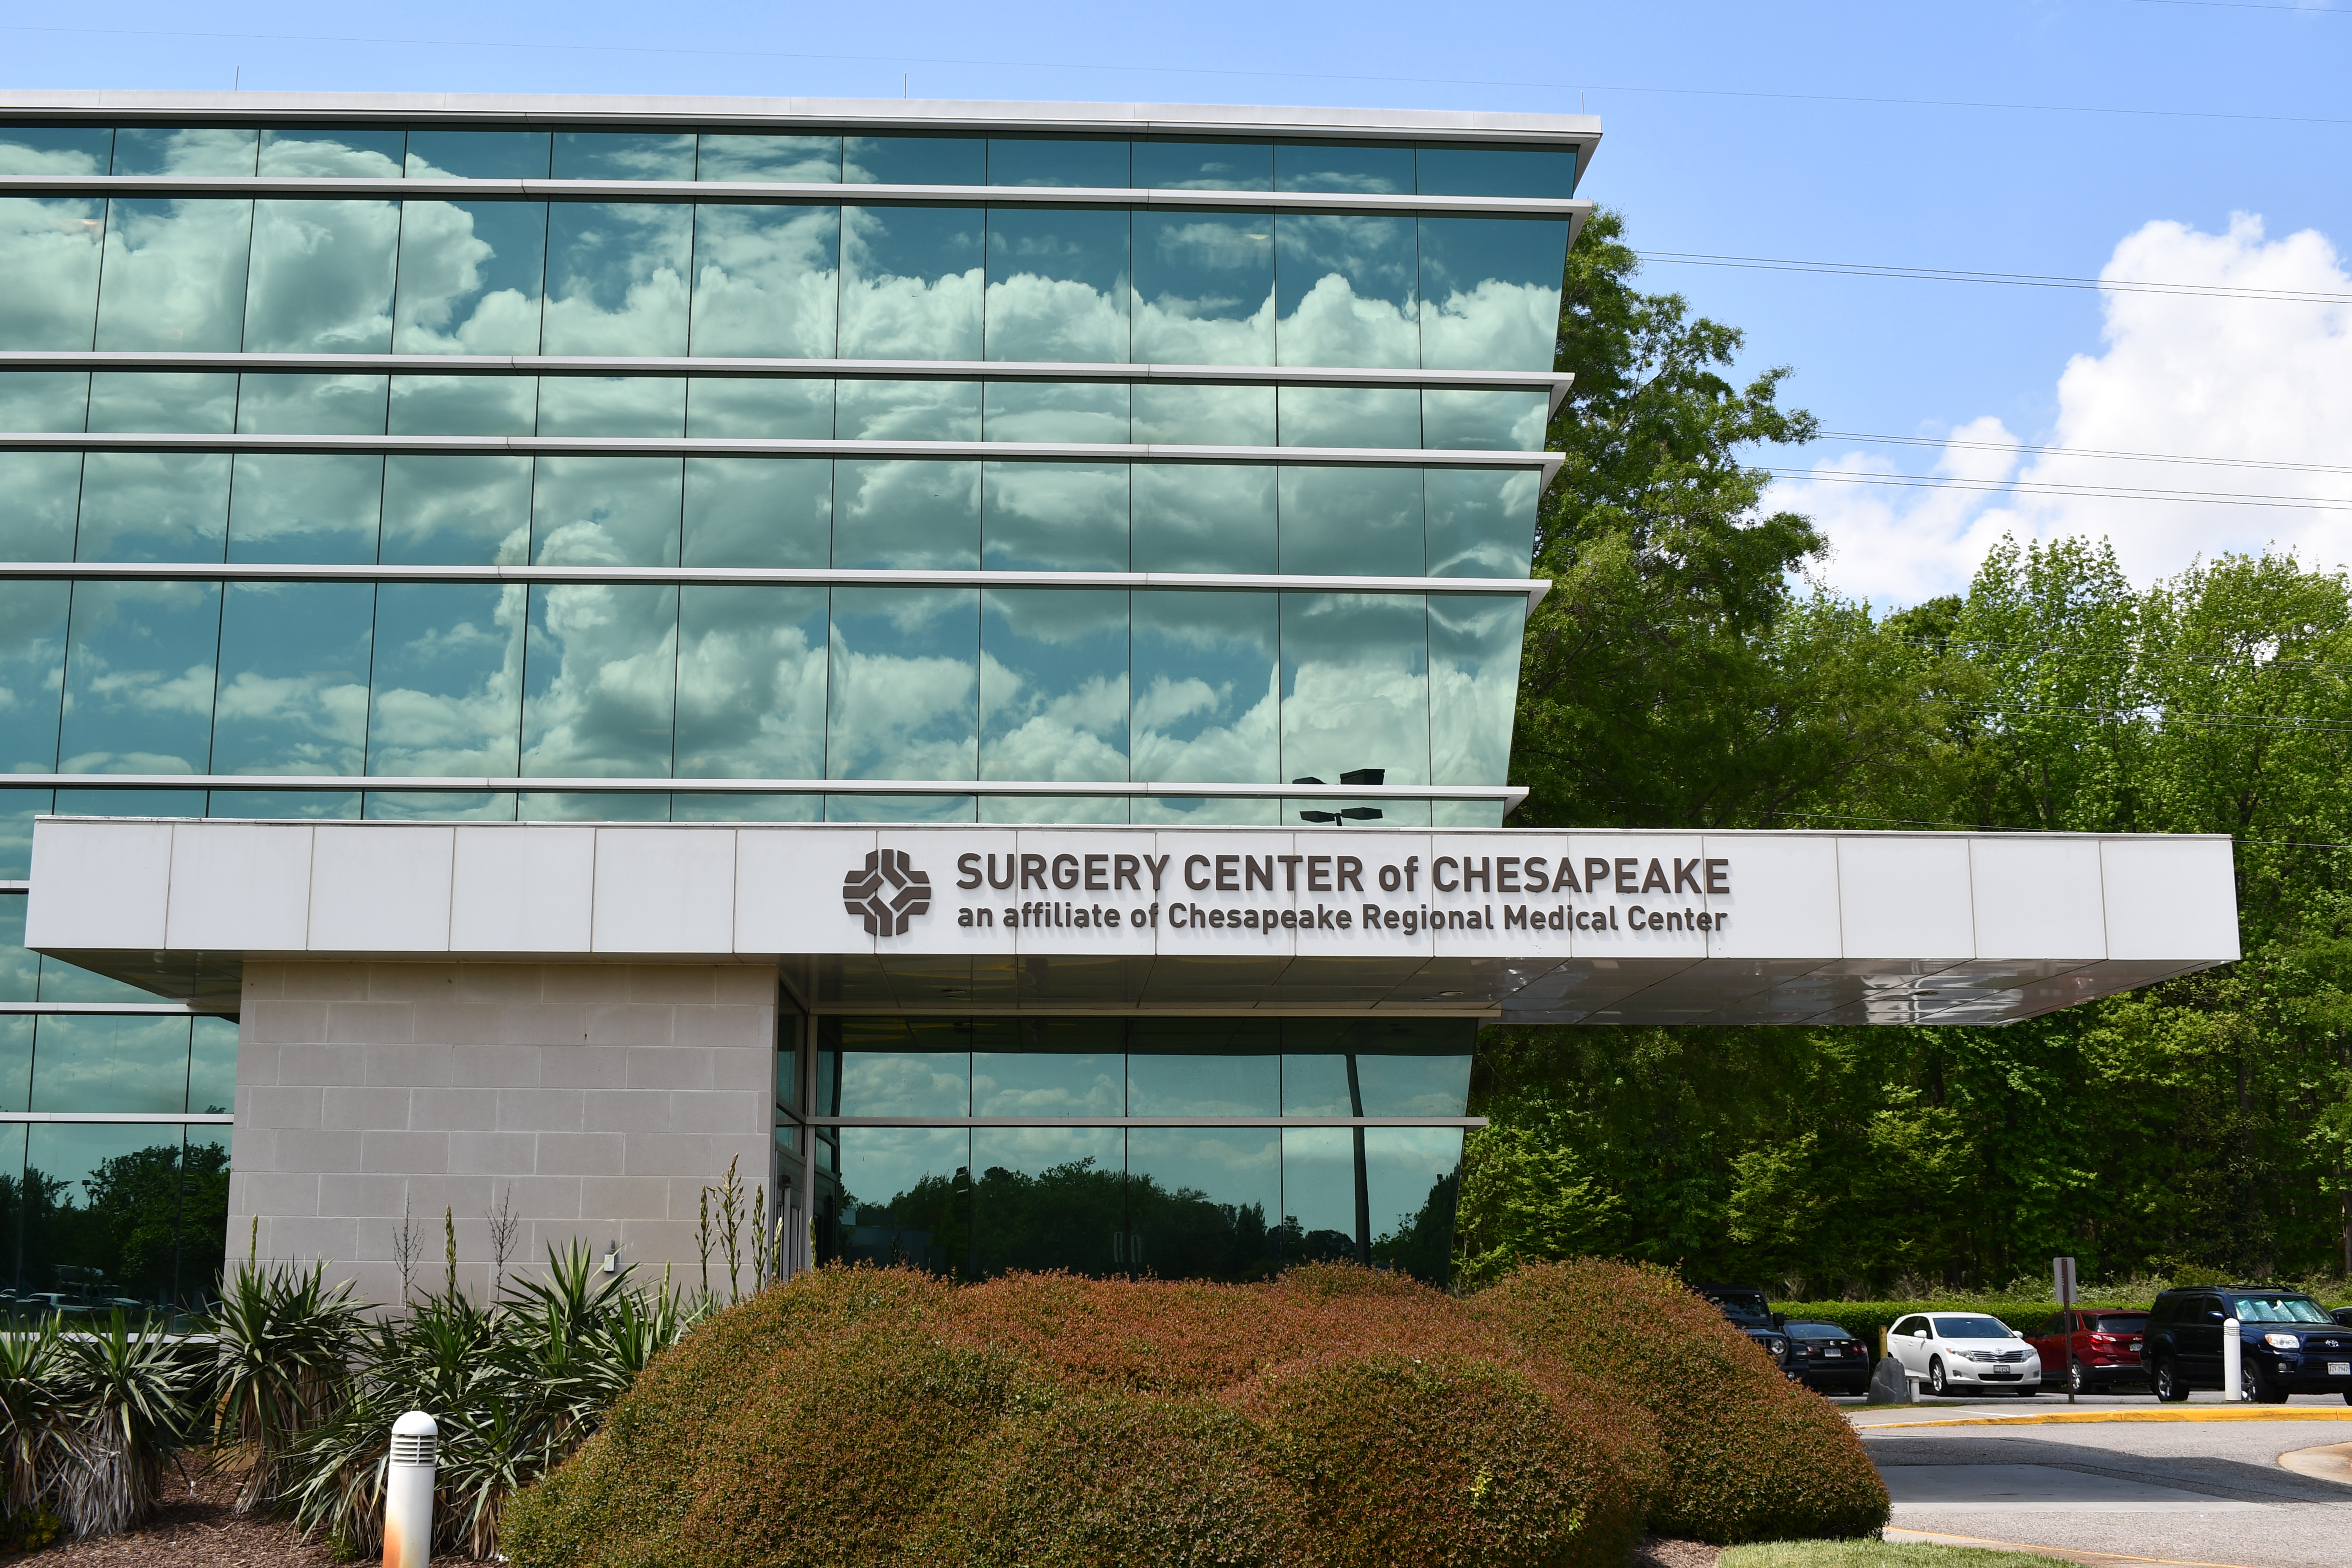 The Surgery Center of Chesapeake entrance